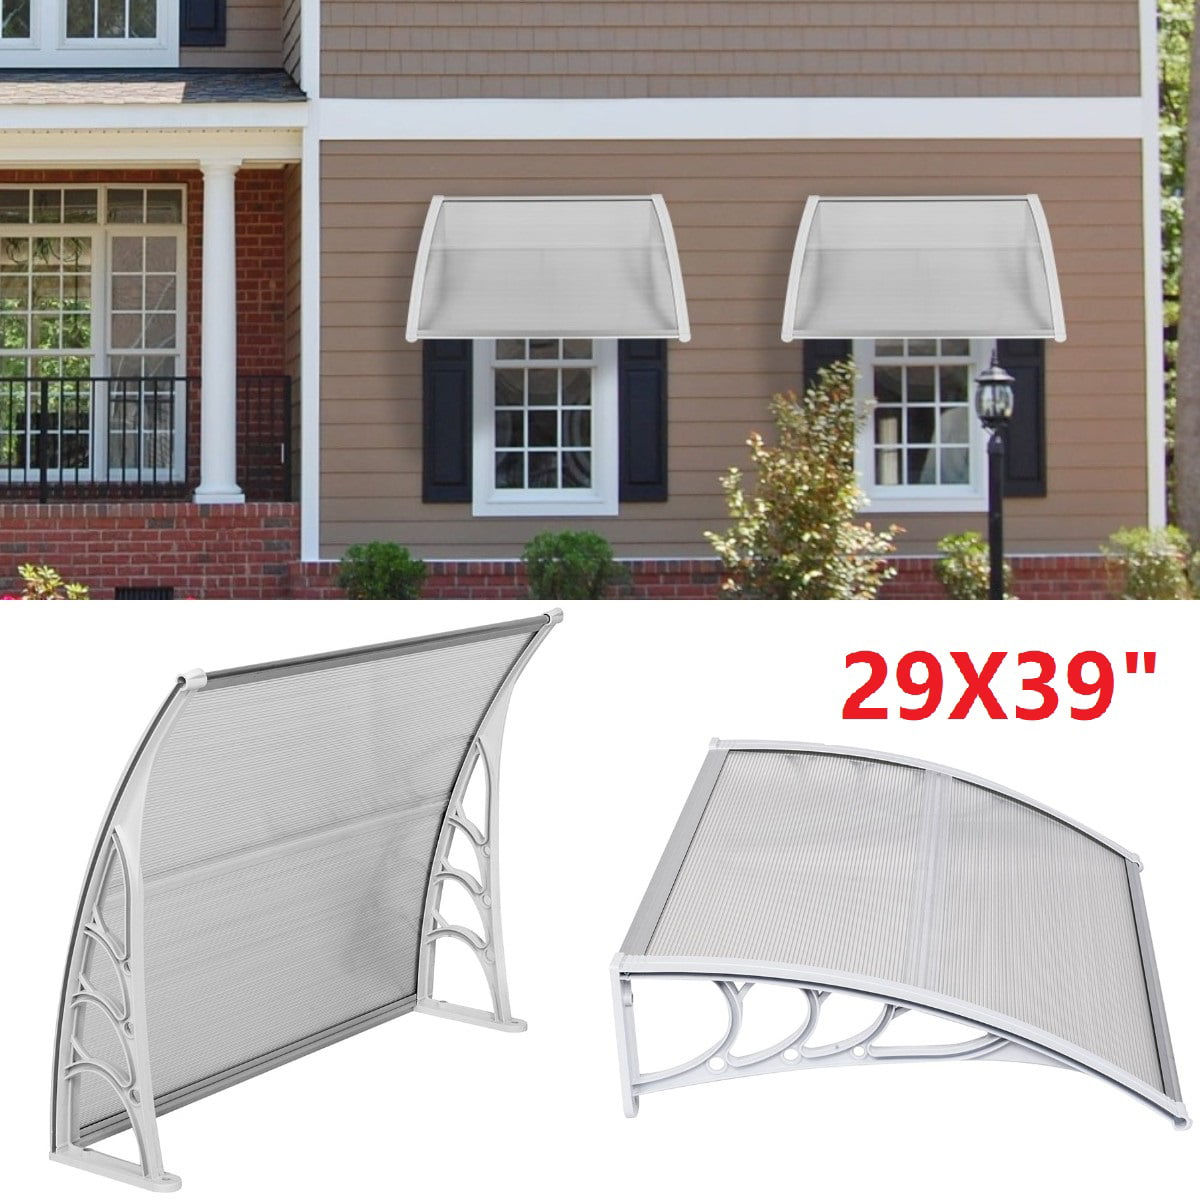 Goorabbit Window Awnings, Polycarbonate Window Awning Overhead Cover ...